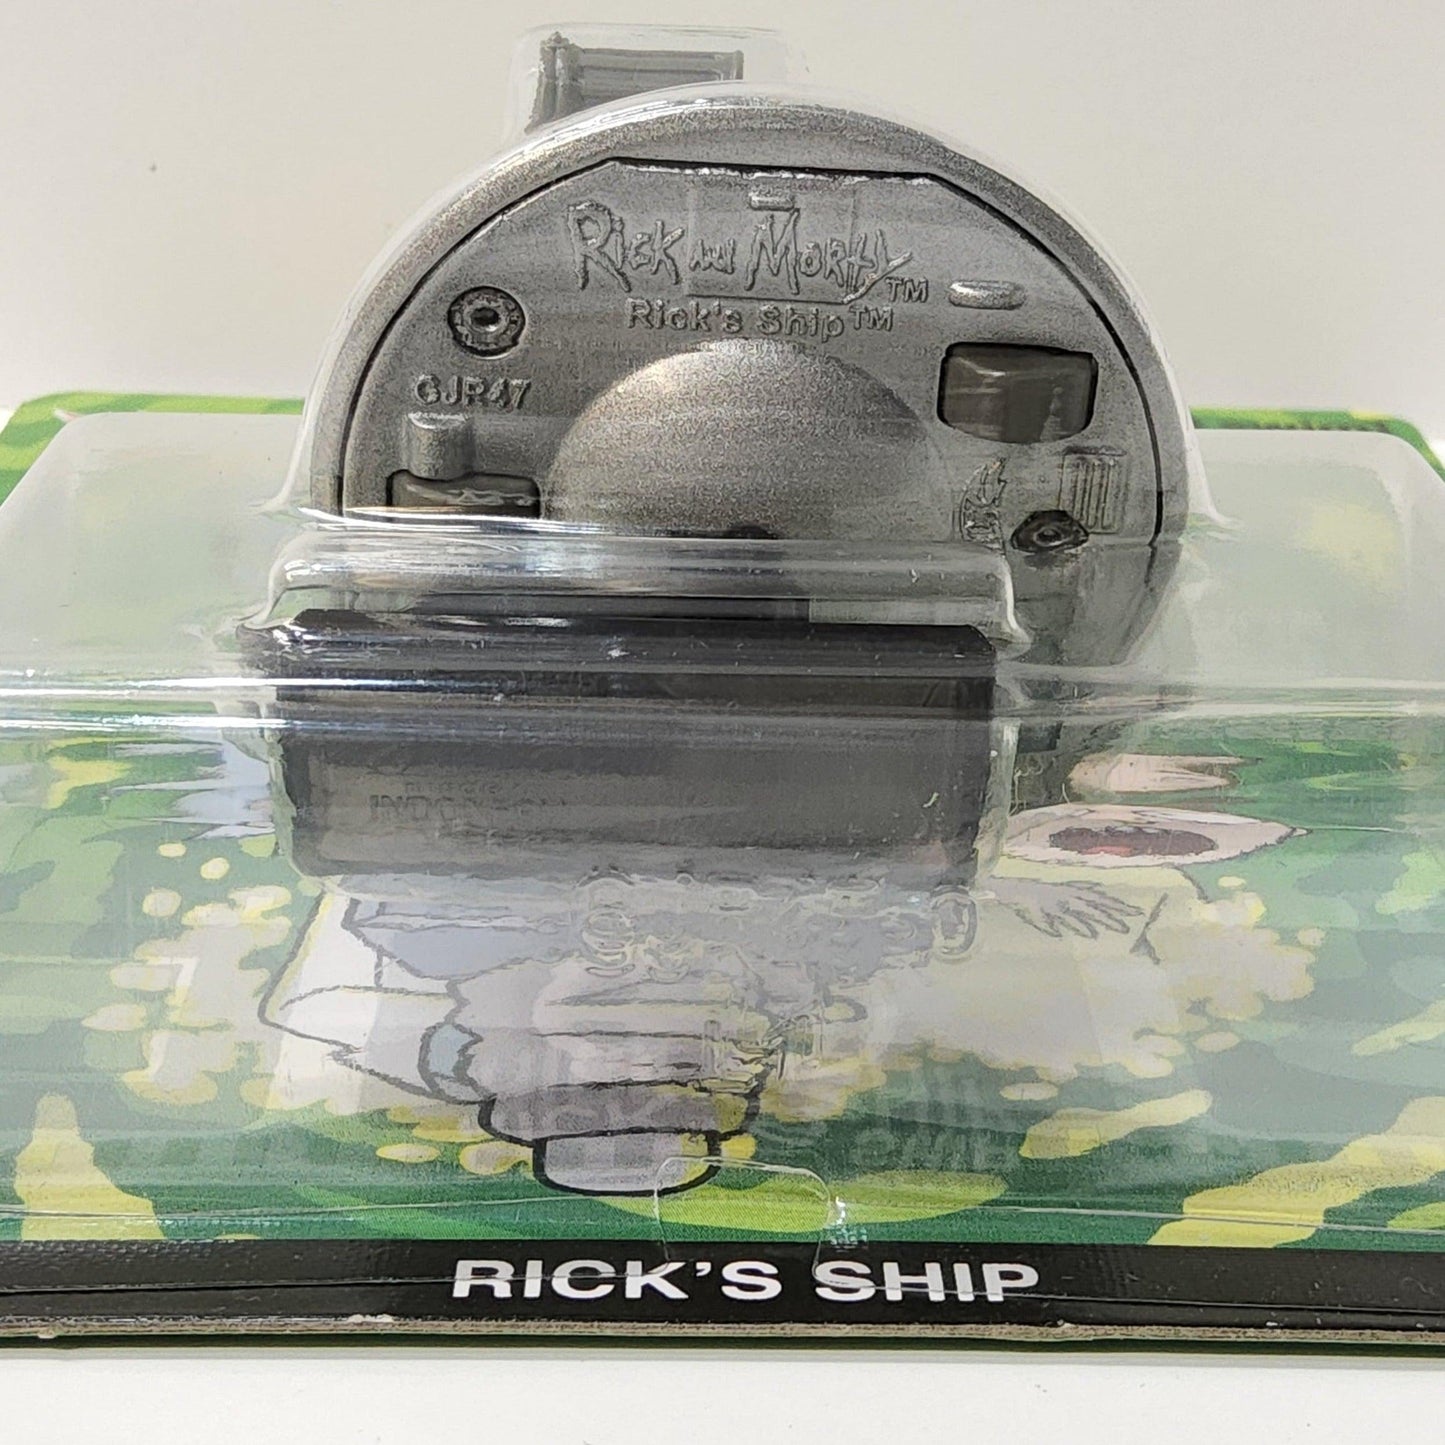 Rick and Morty Rick's Ship Mattel Hot Wheels Adult Swim Toy Car Space Ship - Logan's Toy Chest